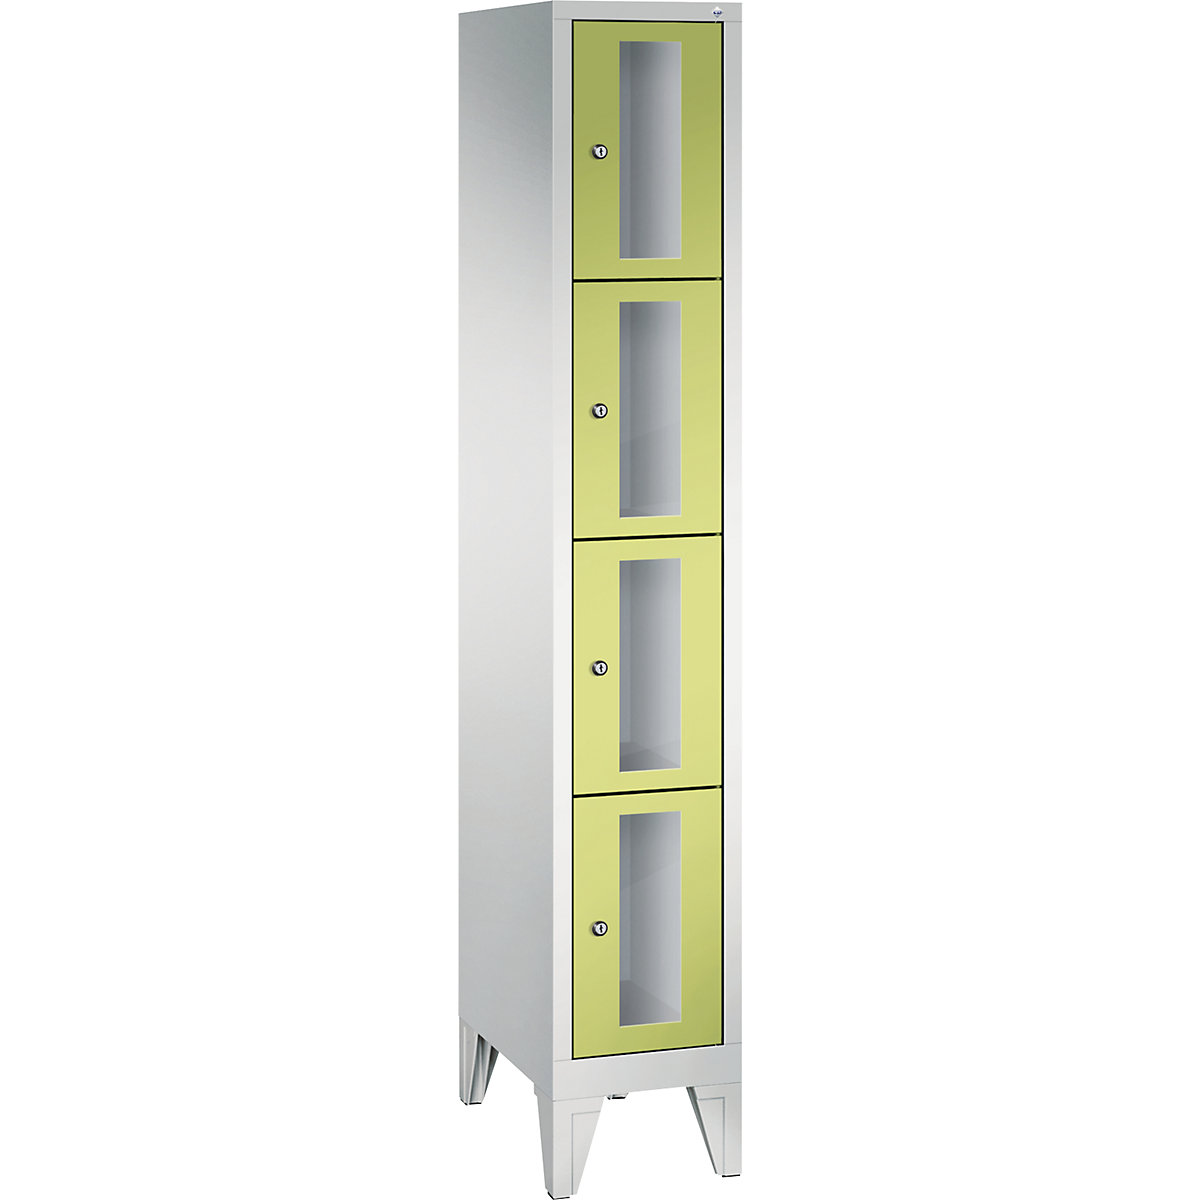 CLASSIC locker unit, compartment height 375 mm, with feet – C+P, 4 compartments, width 320 mm, viridian green door